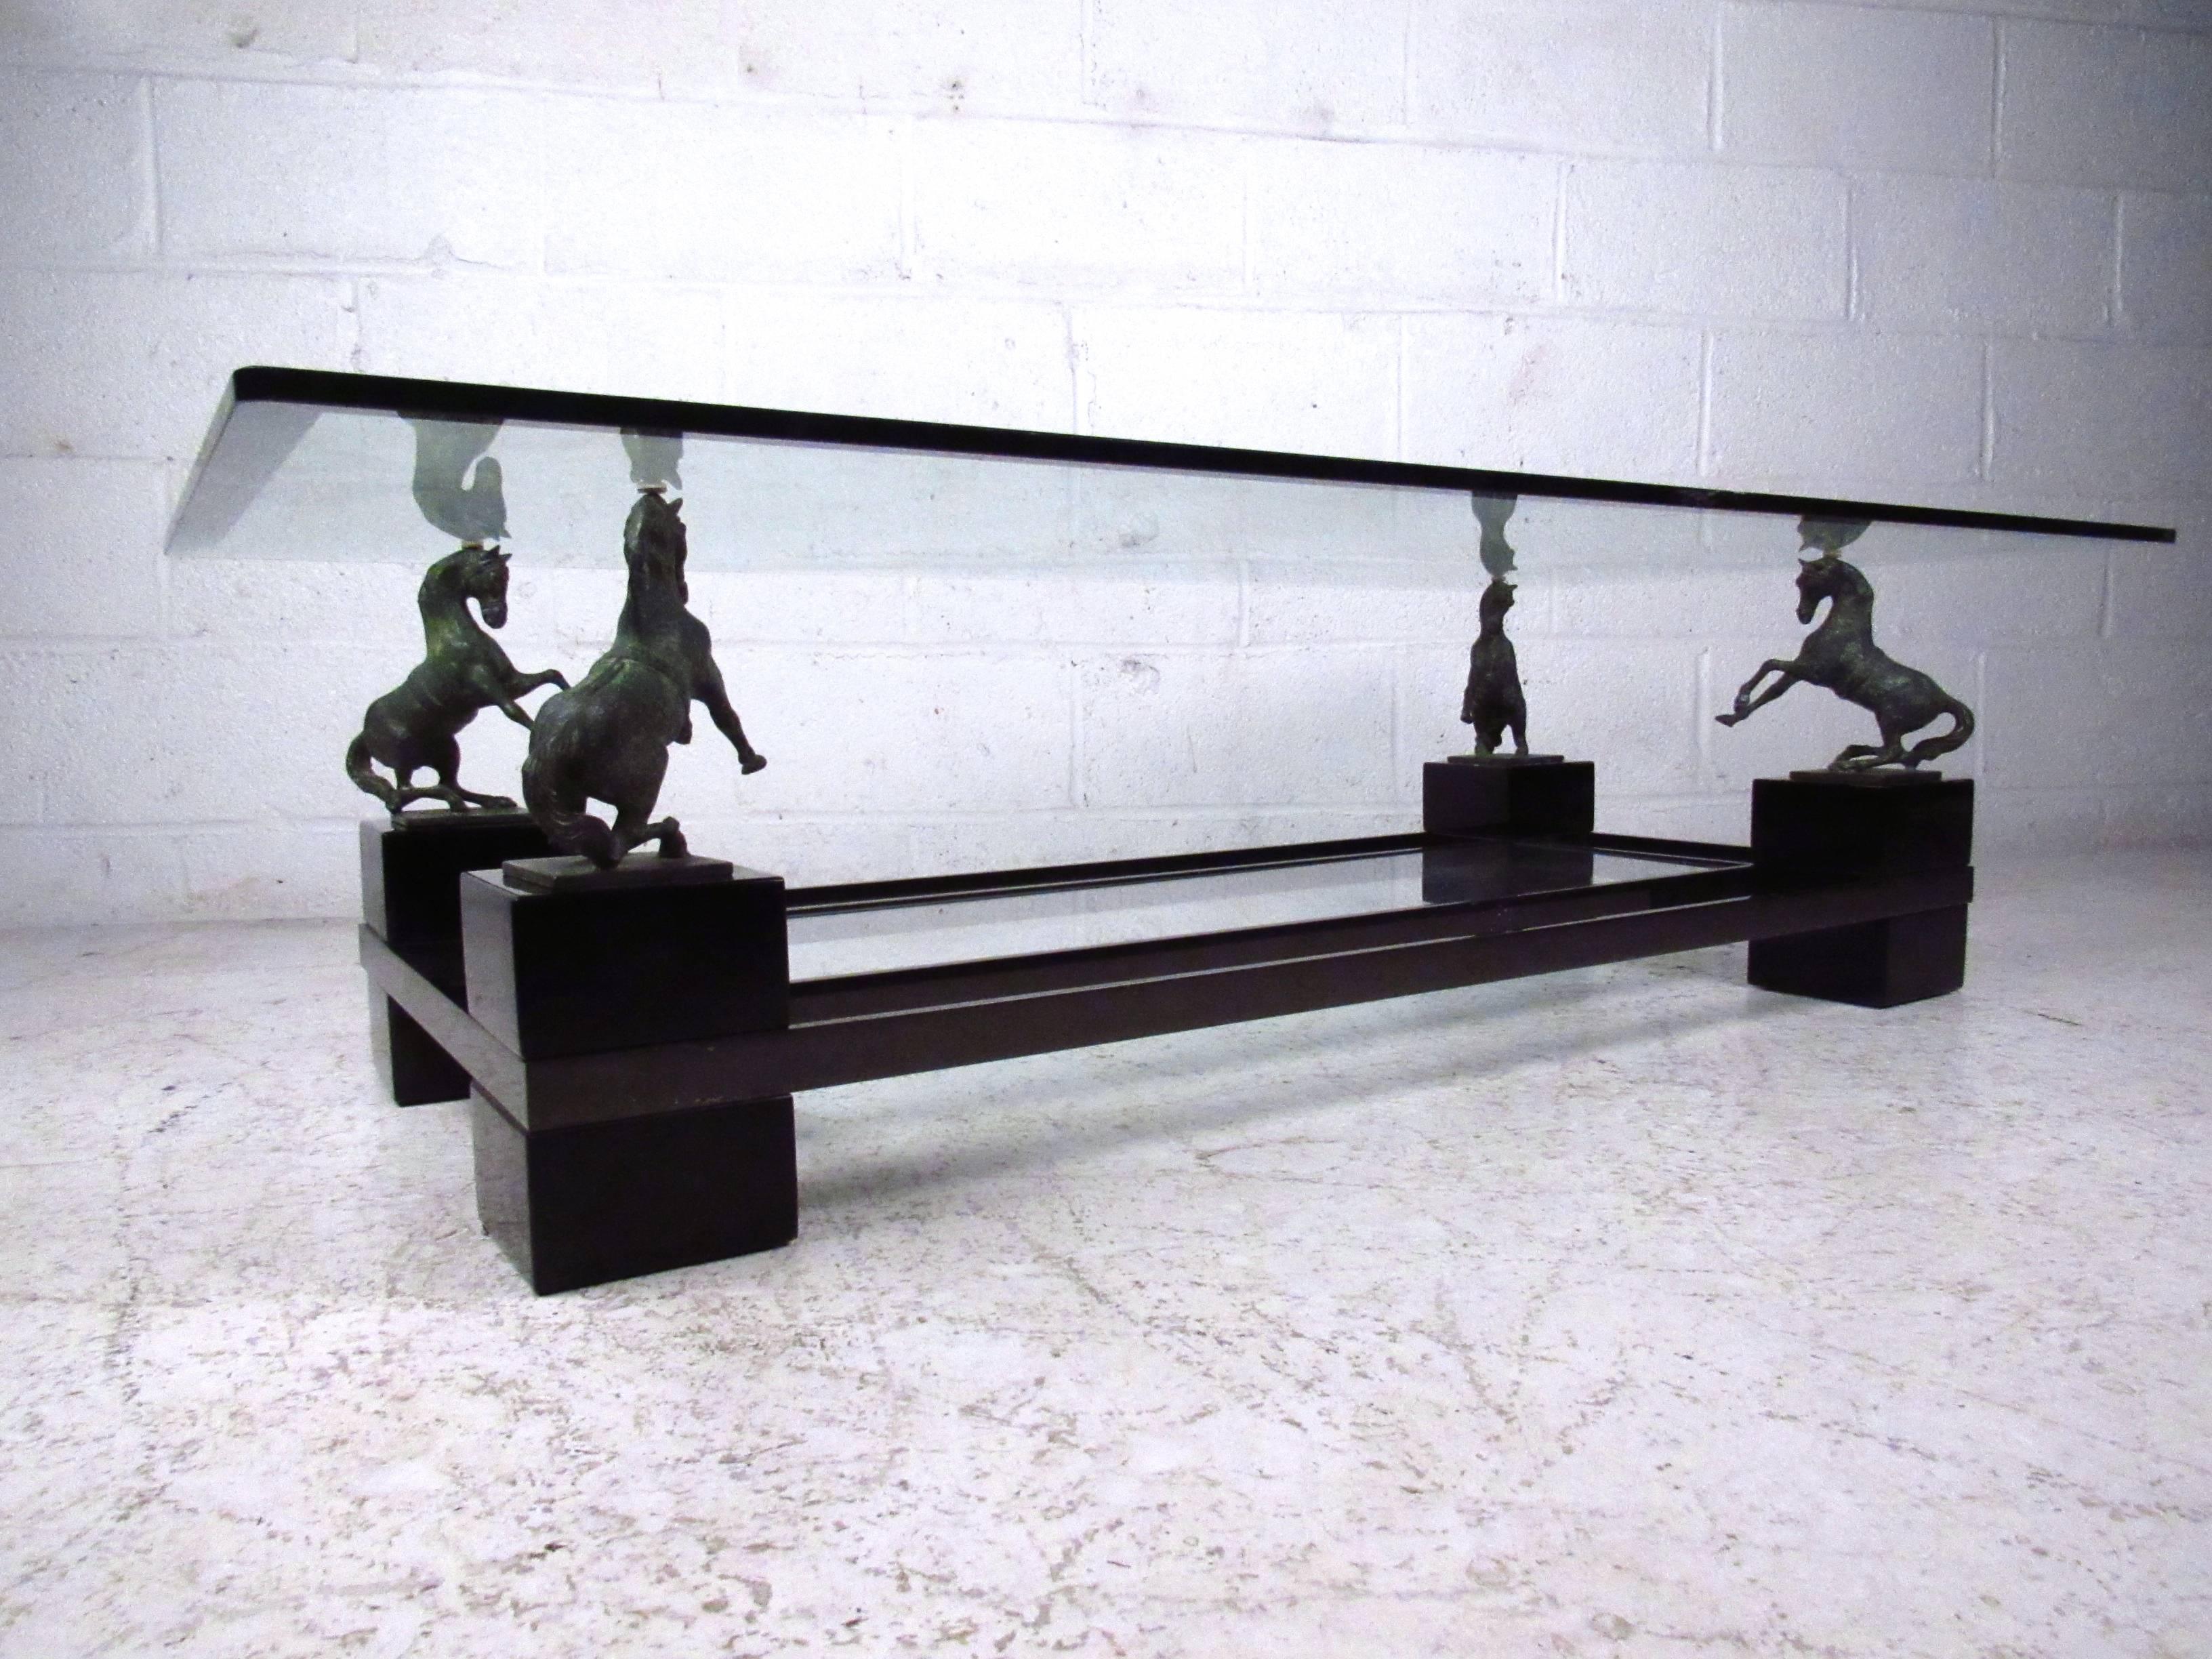 This beautiful coffee table features a thick beveled top supported by rearing bronze horses. Unique and sturdy two tier construction makes this a visually impressive piece in any setting. Please confirm item location (NY or NJ).